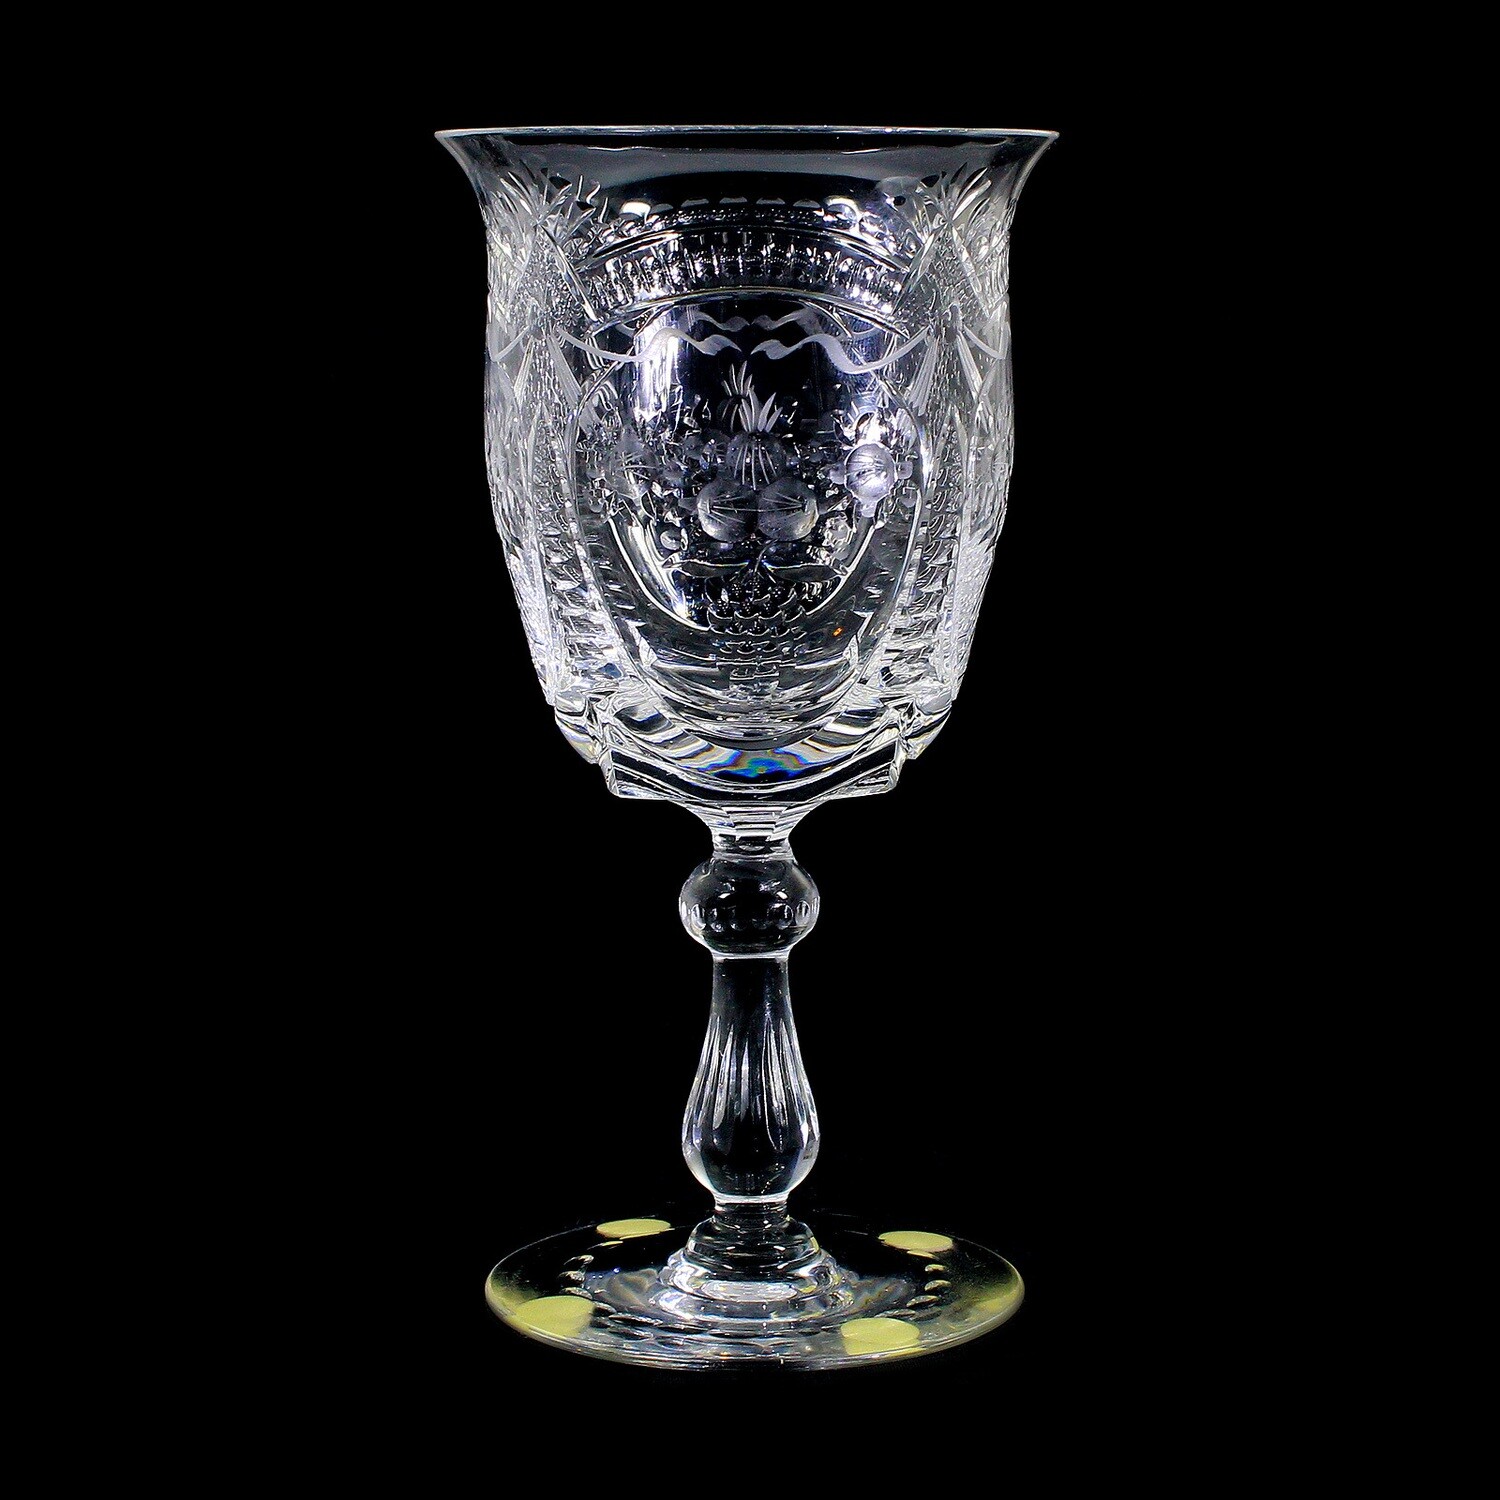 Stem glass made of colorless glass with engraved fruit festoons, Josephinenhütte
​